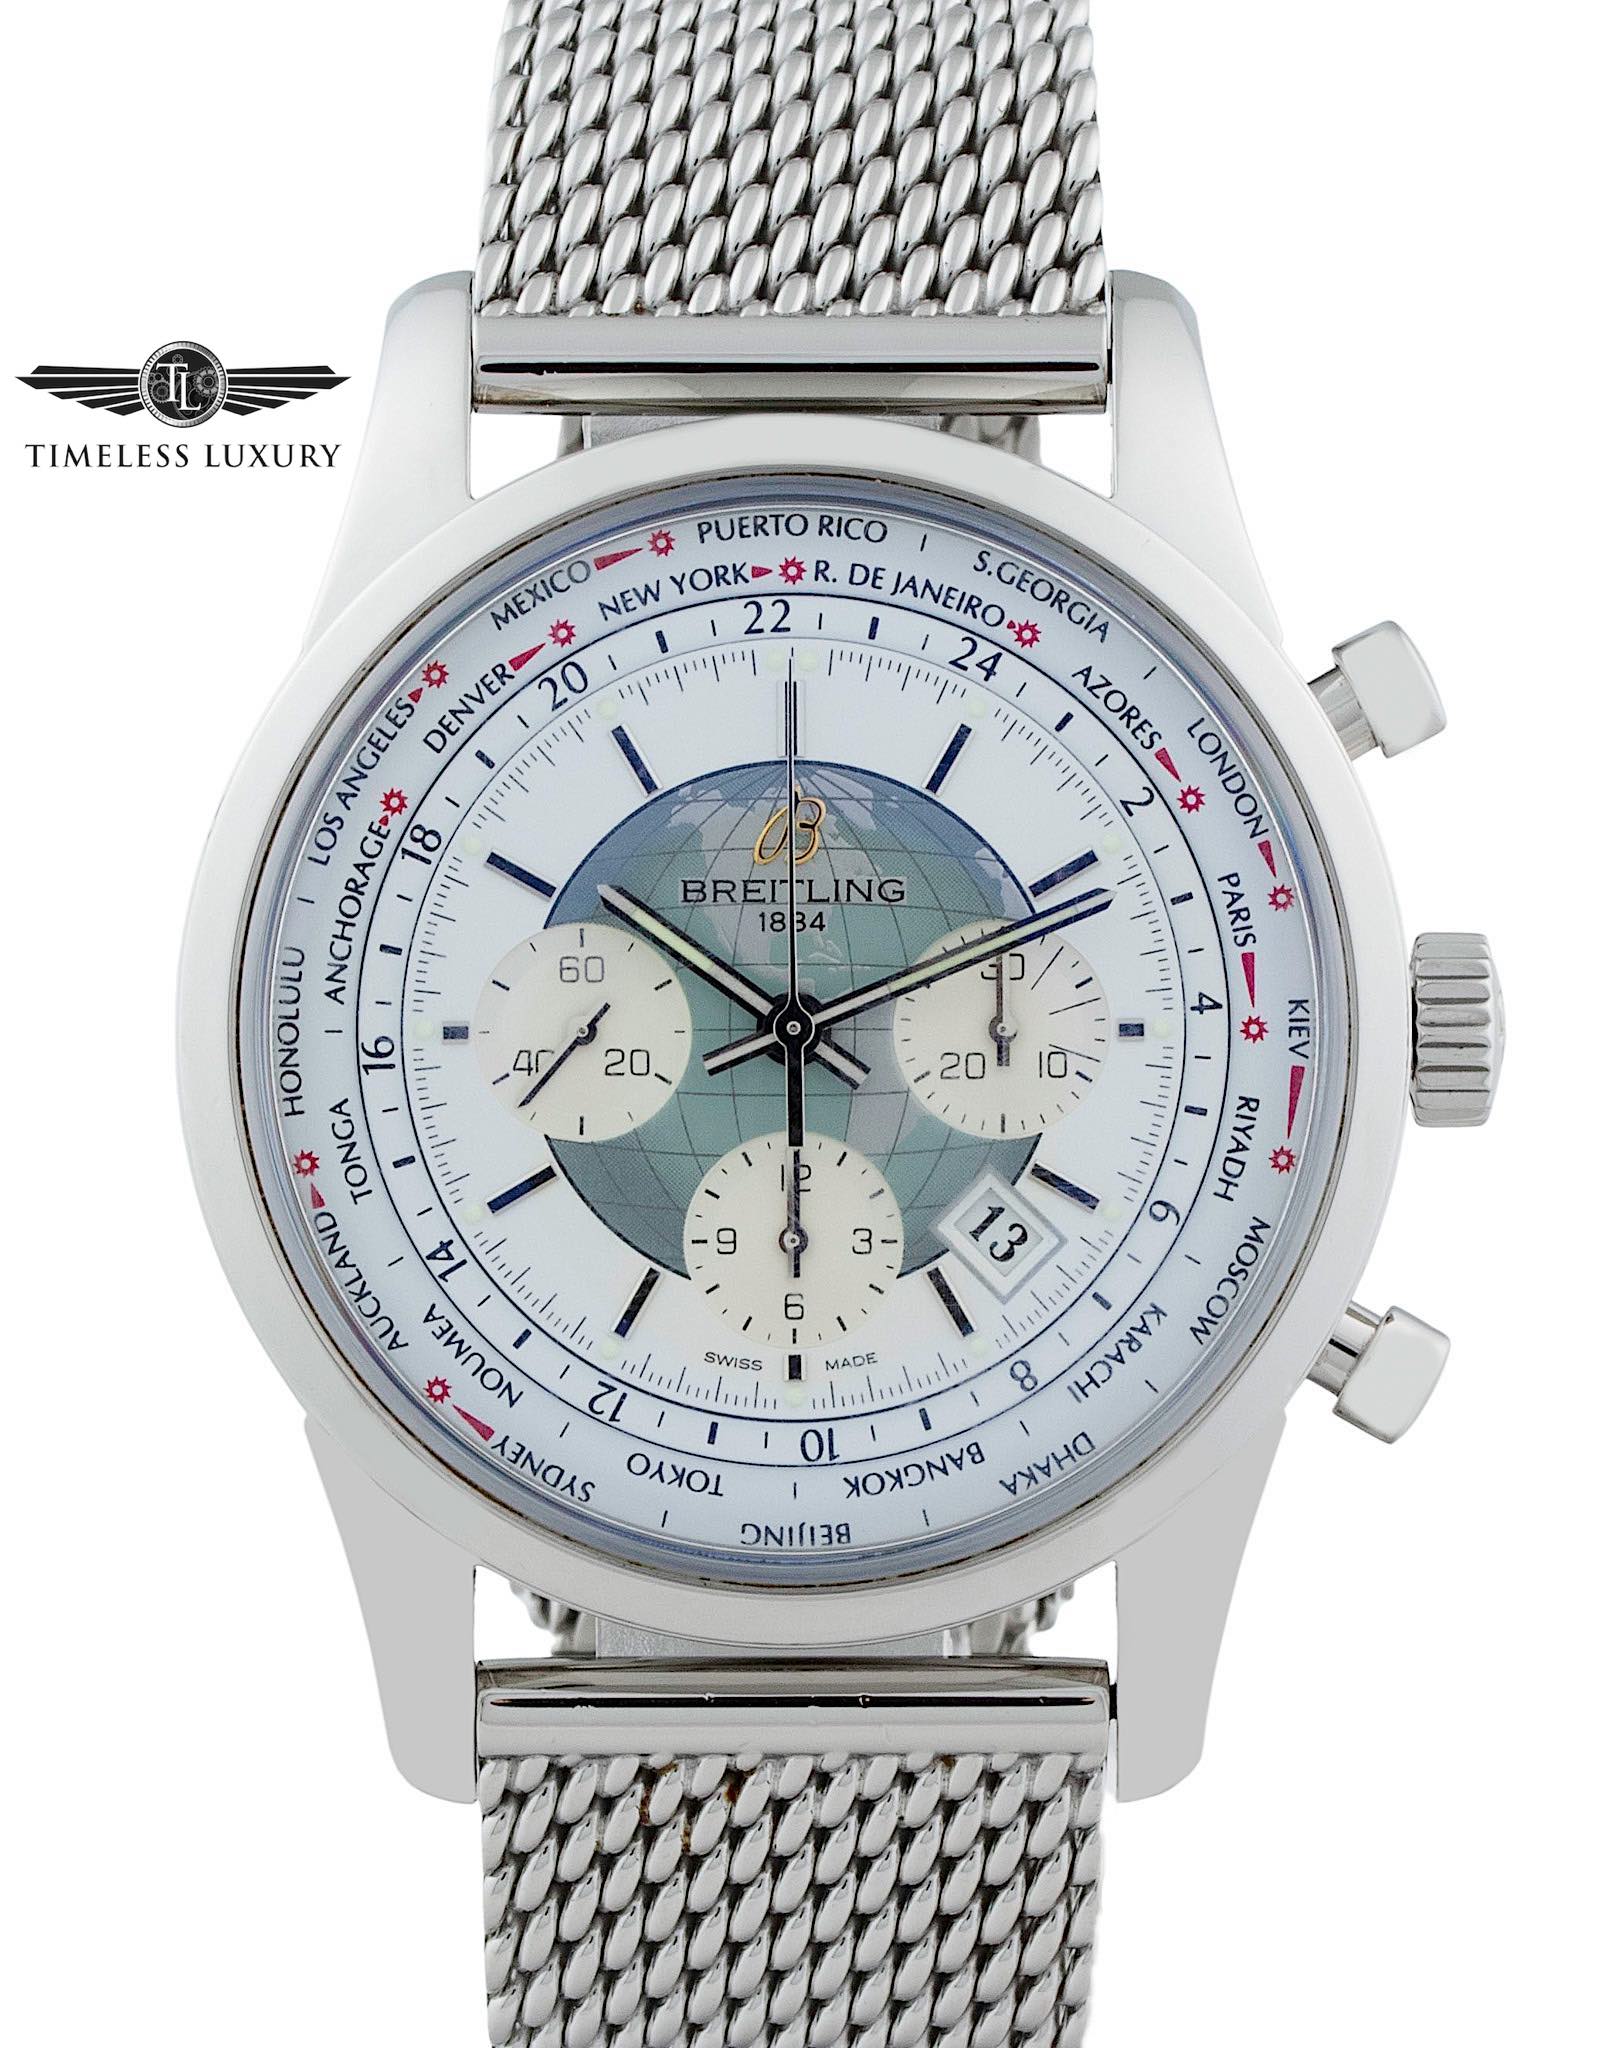 Pre-Owned Breitling Transocean 38 Stainless Steel Automatic